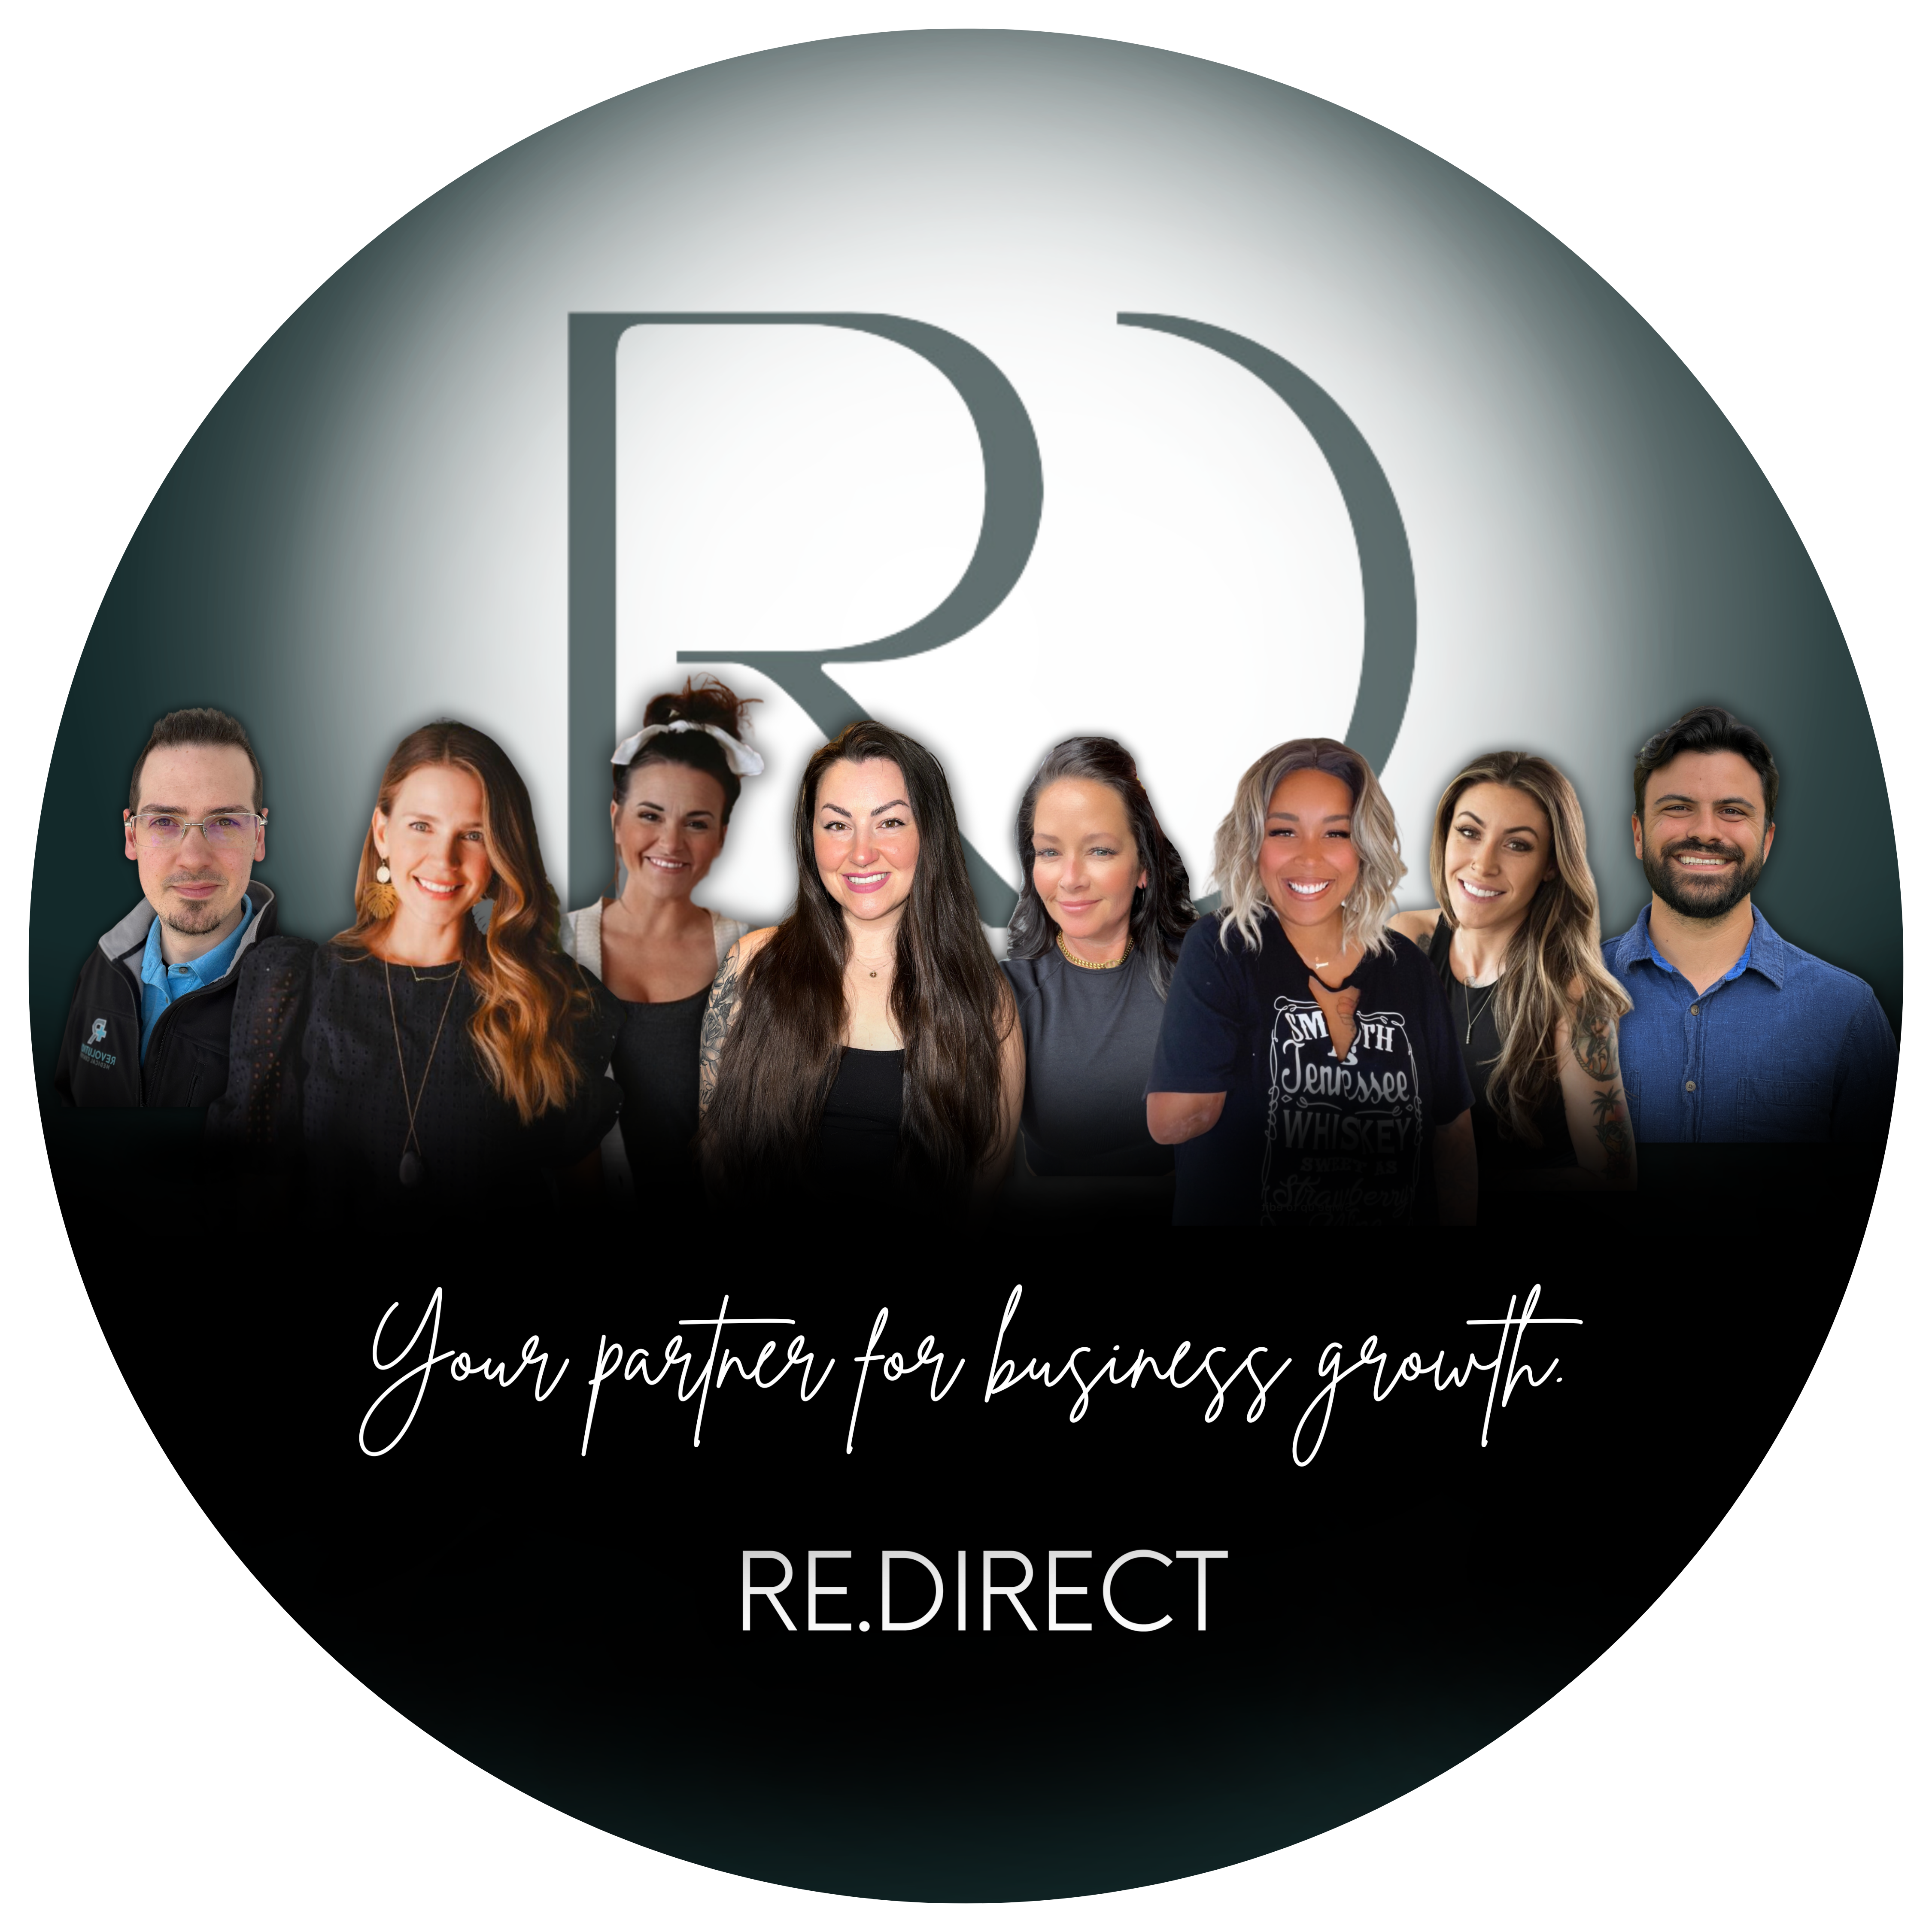 A photo of the RE.DIRECT team welcoming you to their site